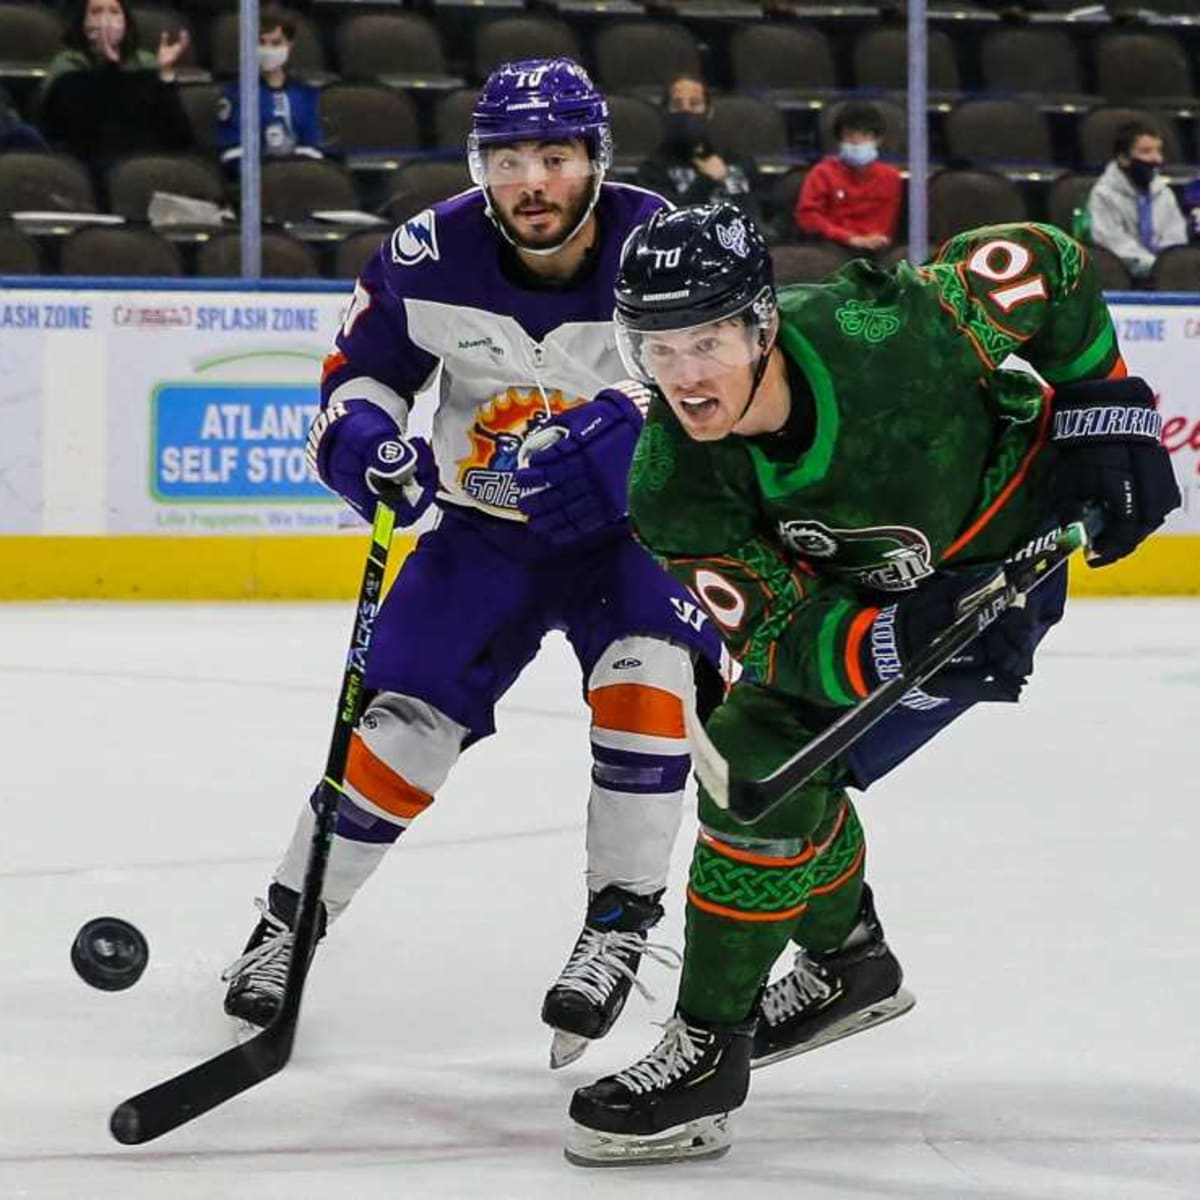 ECHL All-Star Classic Live Stream Watch Online, TV Channel, Start Time - How to Watch and Stream Major League and College Sports